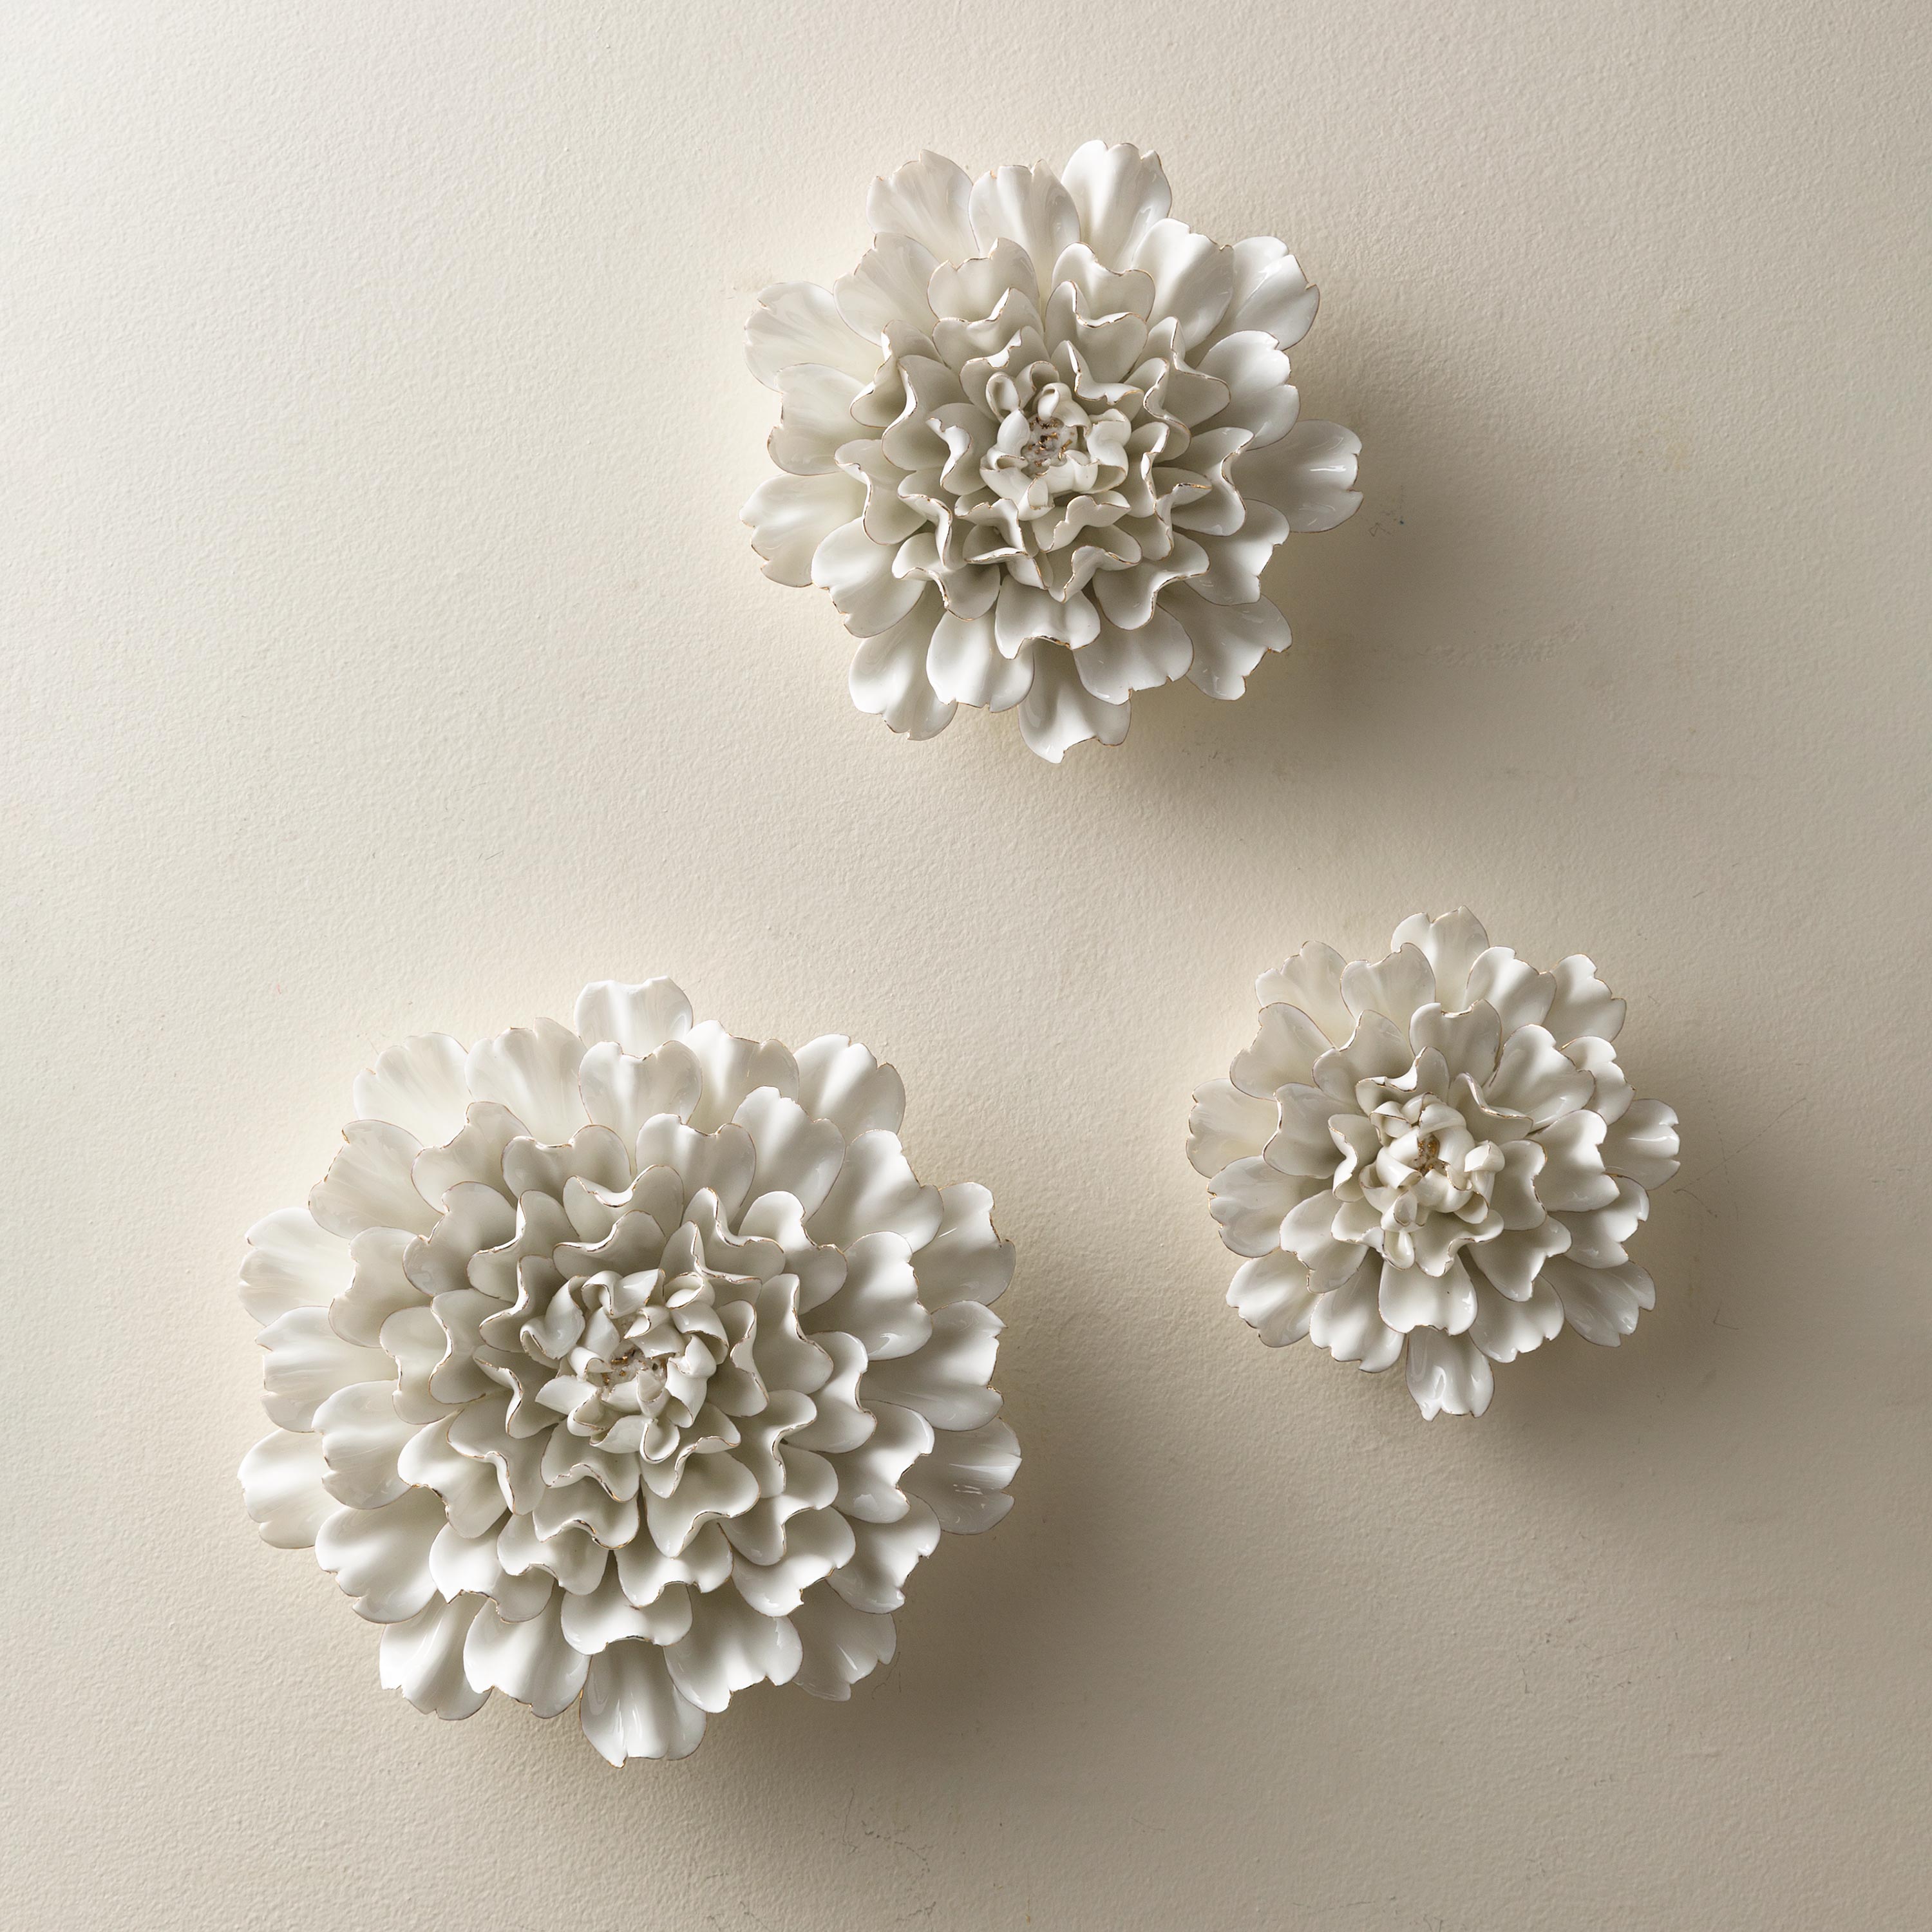 "Bright" Ceramic Wall Flower Collection, Set of 7